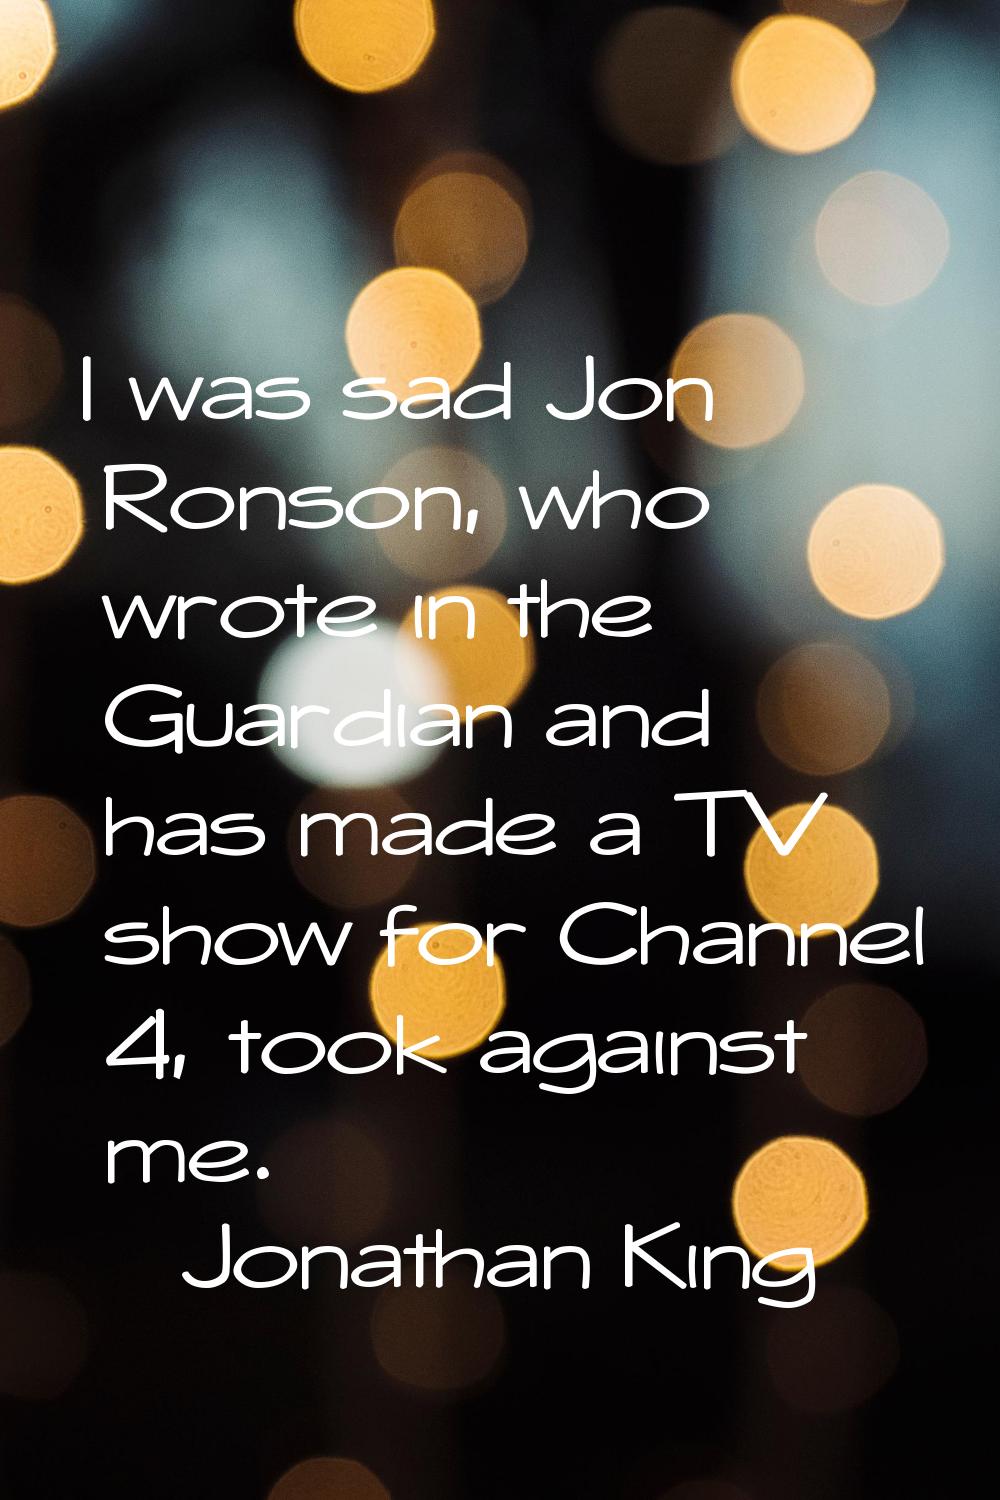 I was sad Jon Ronson, who wrote in the Guardian and has made a TV show for Channel 4, took against 